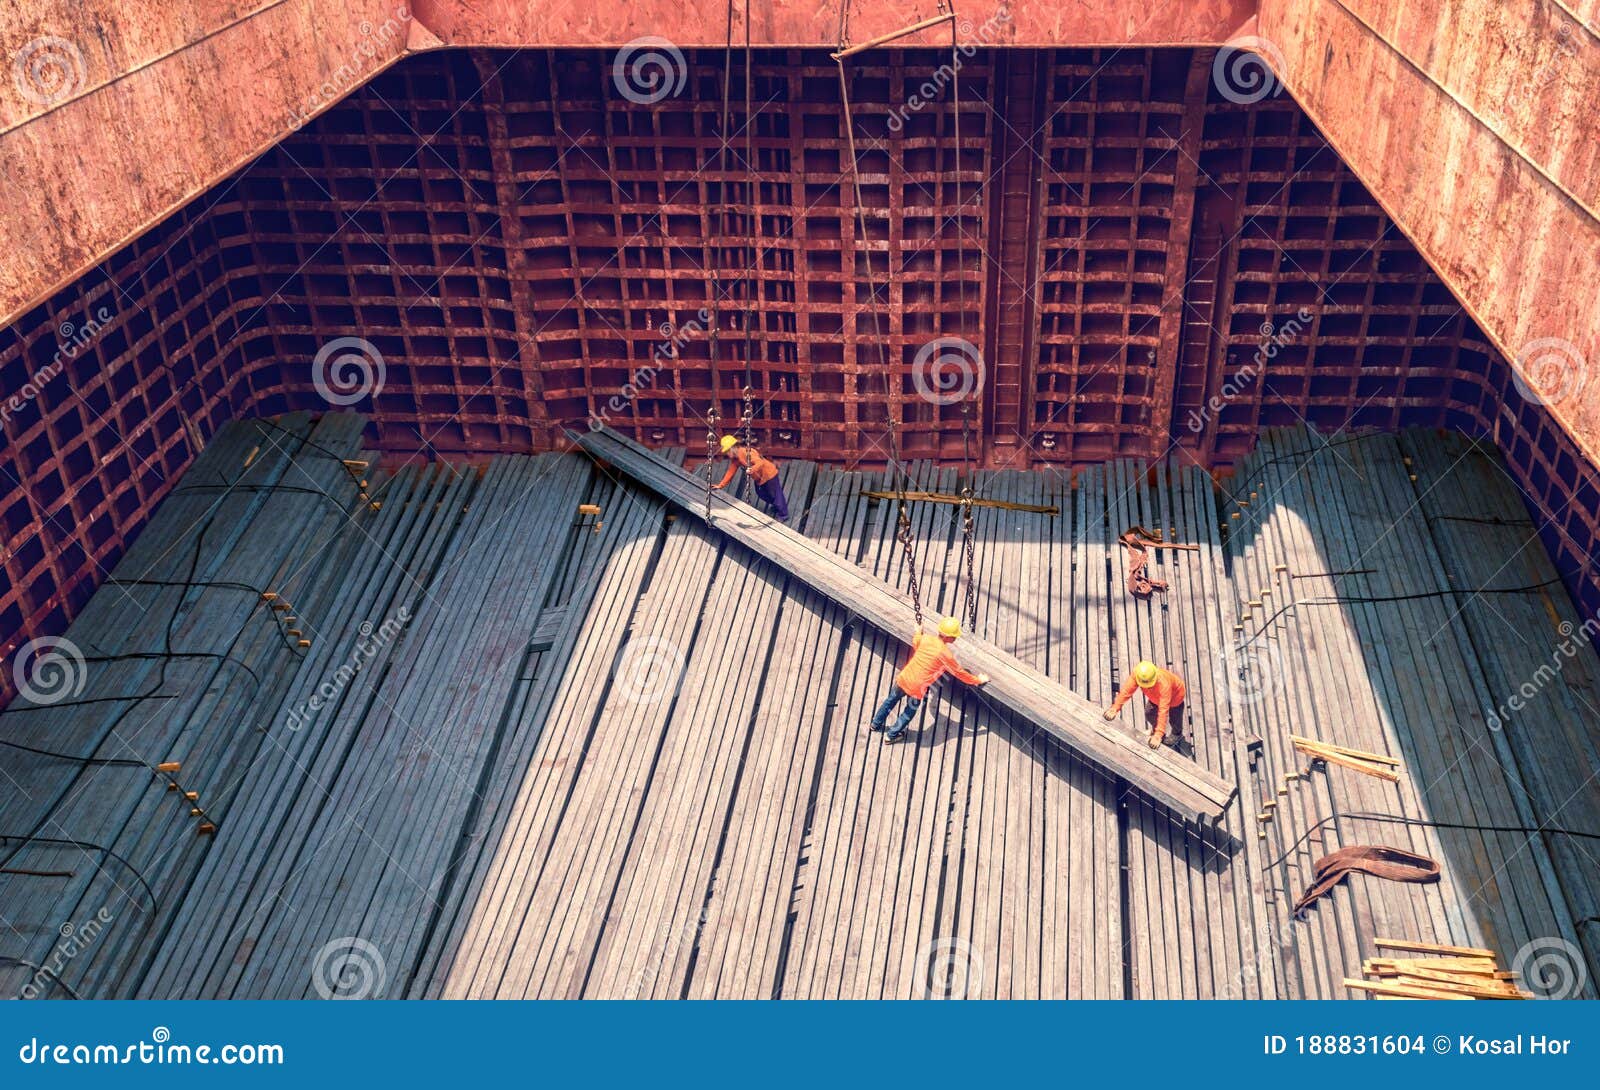 steel billets stacked to loading from a ship in port - the raw material for the manufacture of parts.